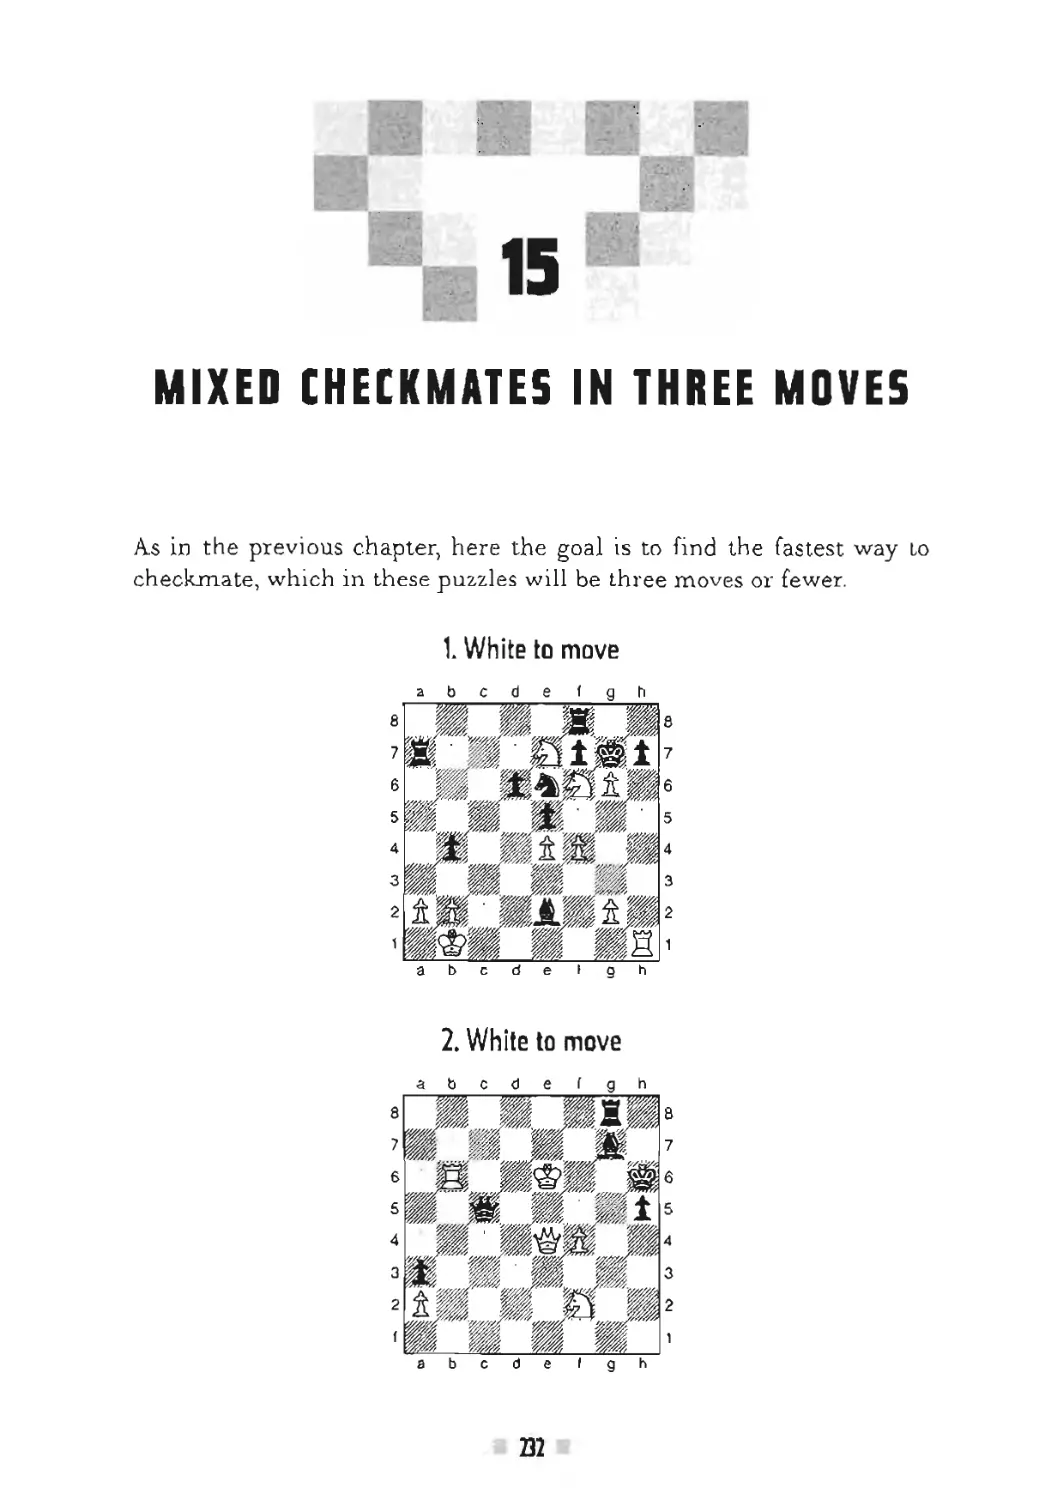 15 Mixed checkmates in three moves